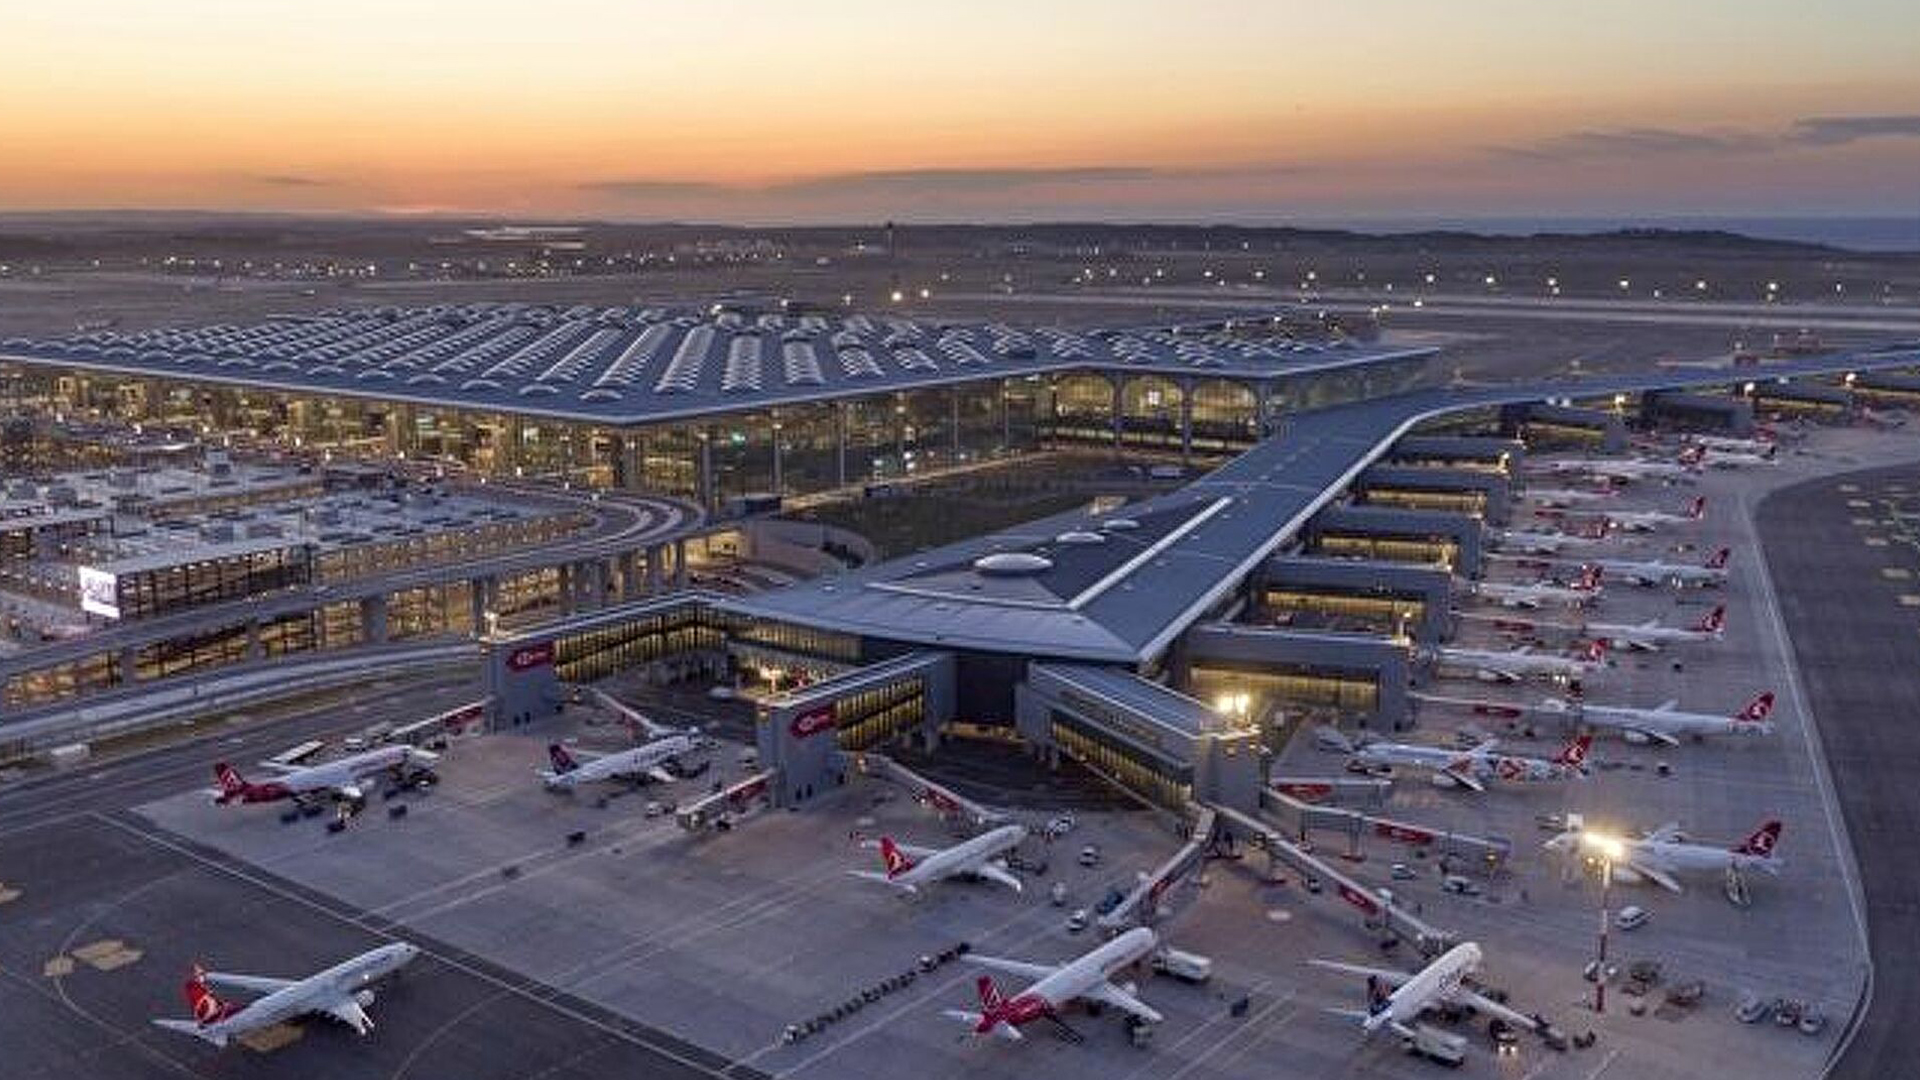 OUR SOLUTION PARTNER IN NEW ISTANBUL AIRPORT